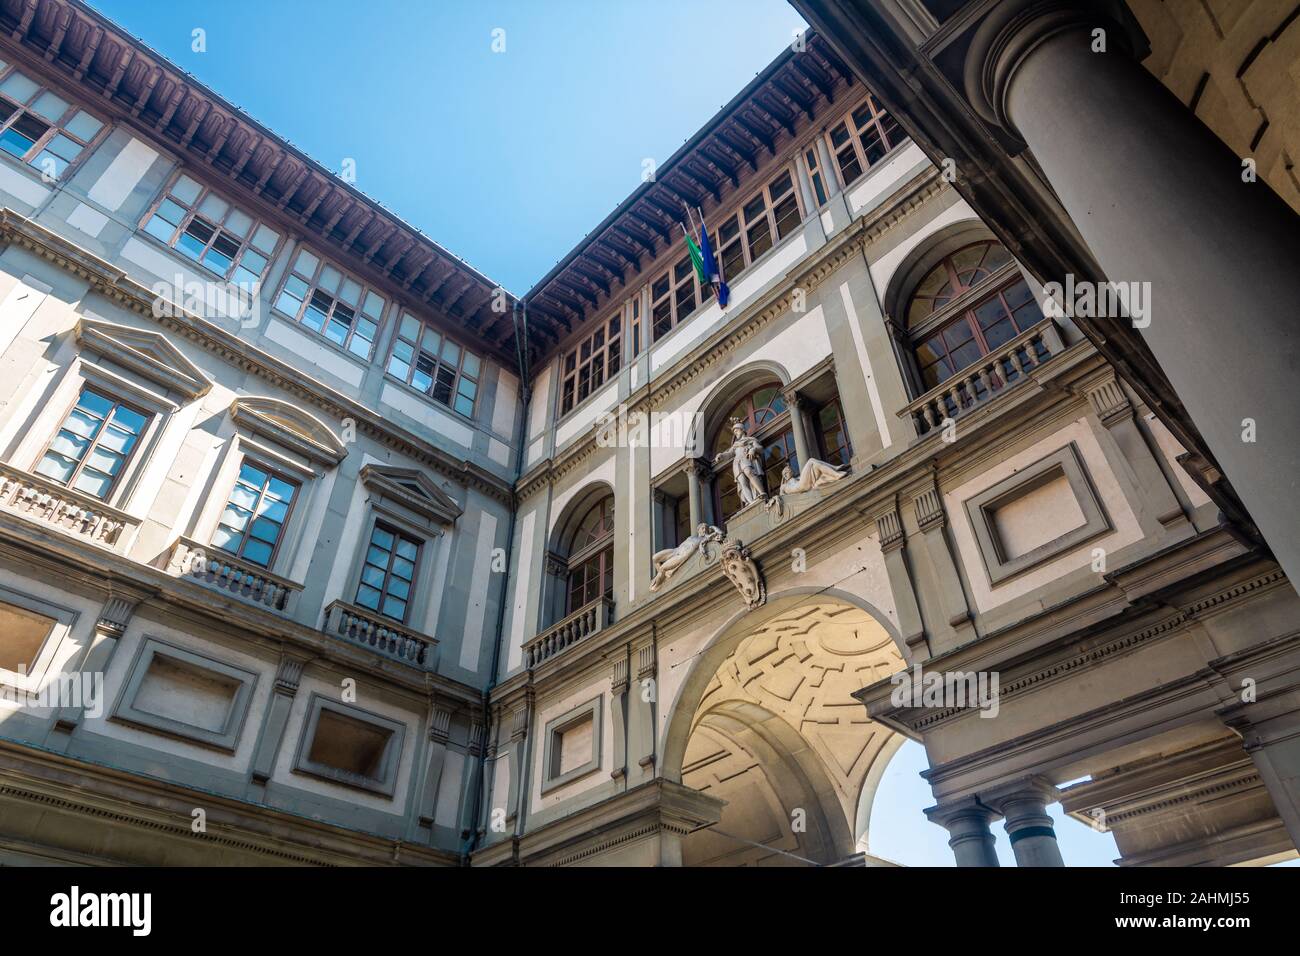 The Uffizi Gallery is a prominent art museum located adjacent to the Piazza della Signoria in the Historic Centre. It holds a collection of priceless Stock Photo